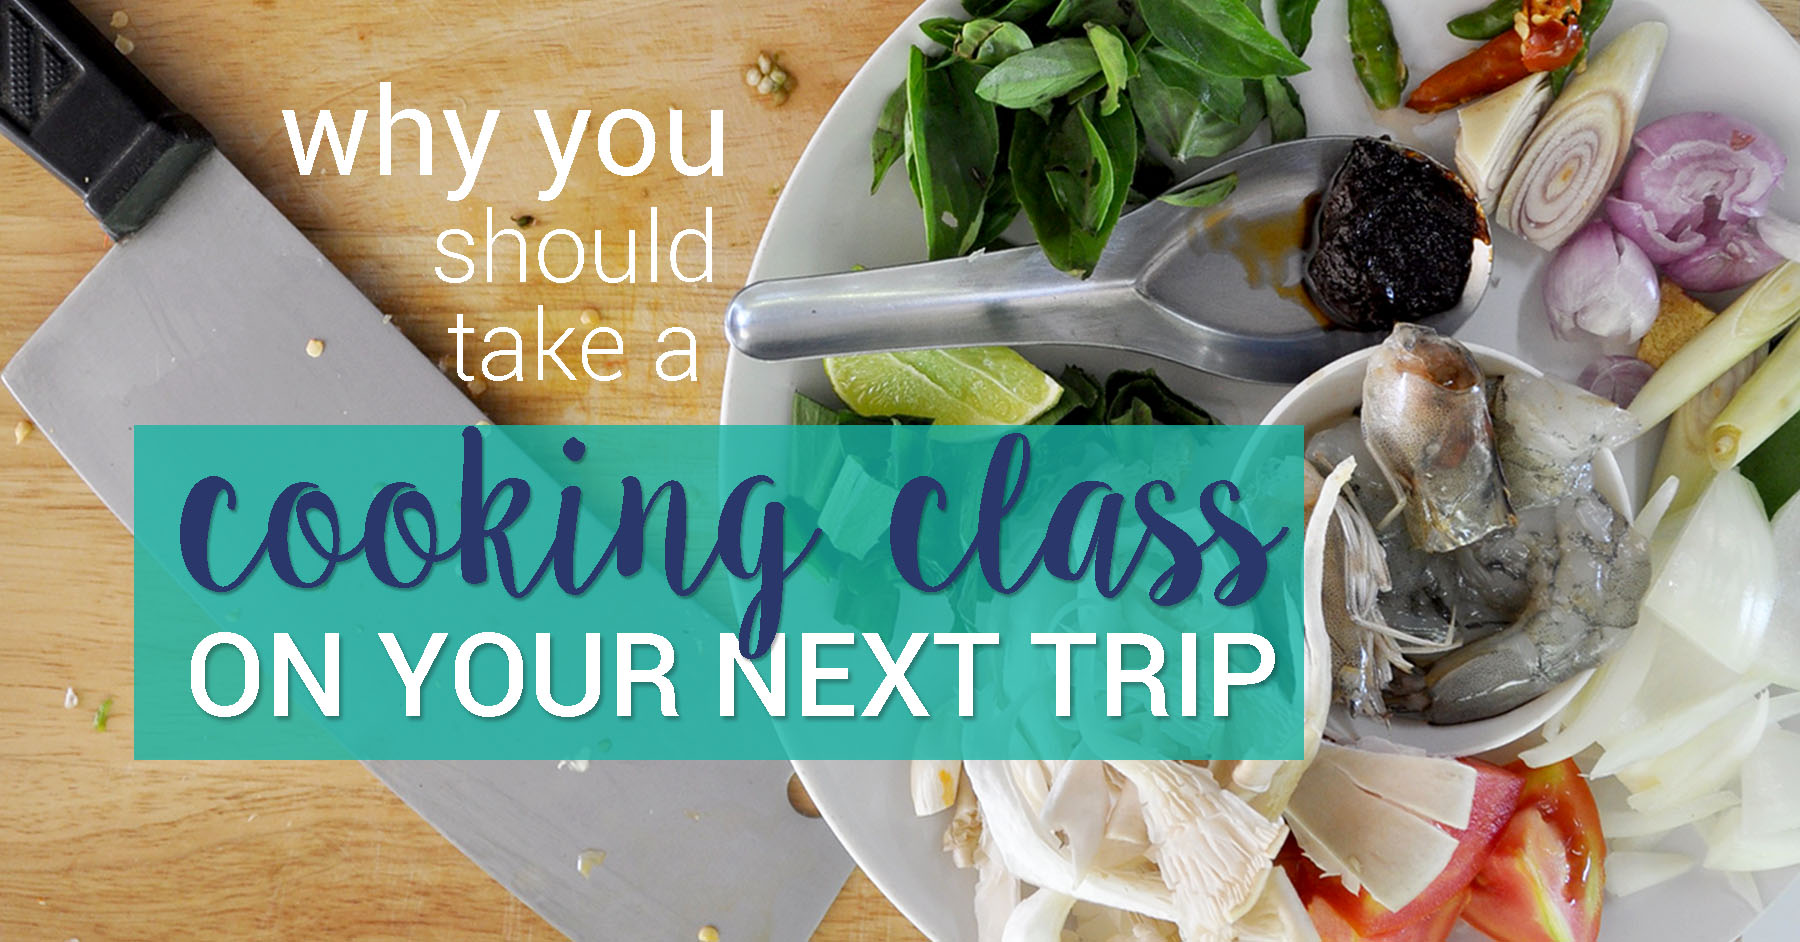 Why you should take a cooking class on your next trip